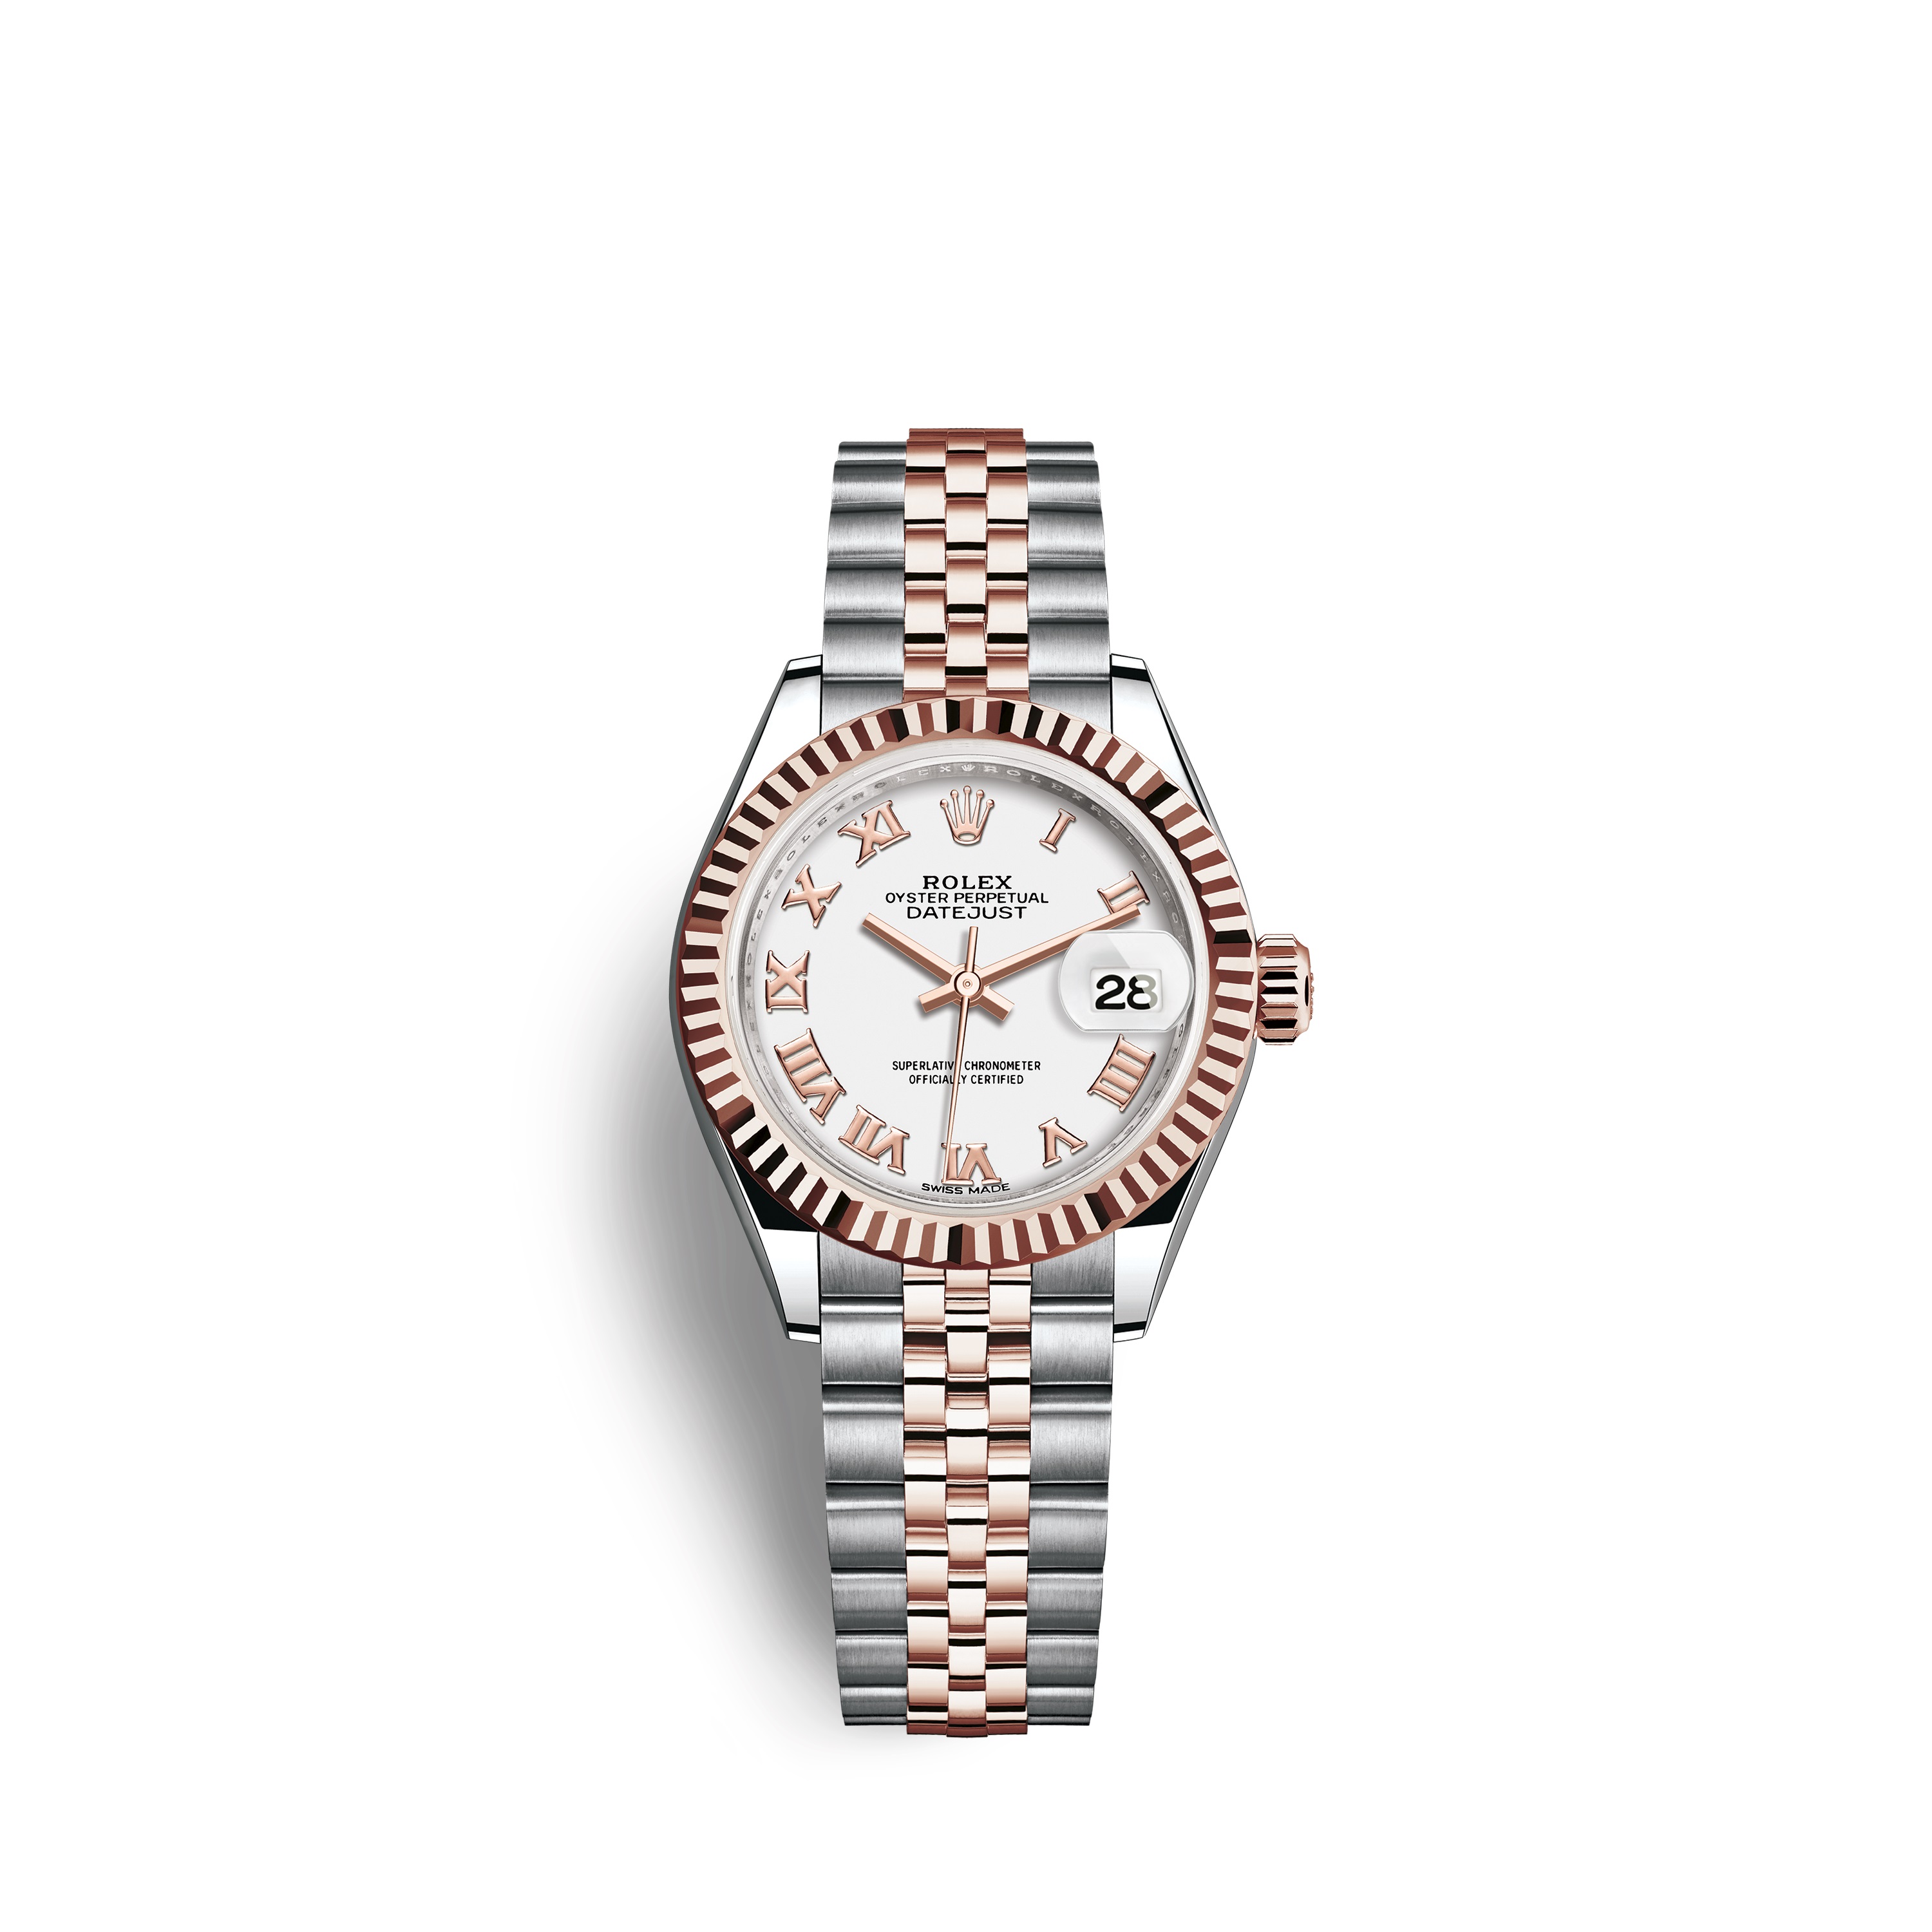 Lady-Datejust 28 279171 Rose Gold & Stainless Steel Watch (White)